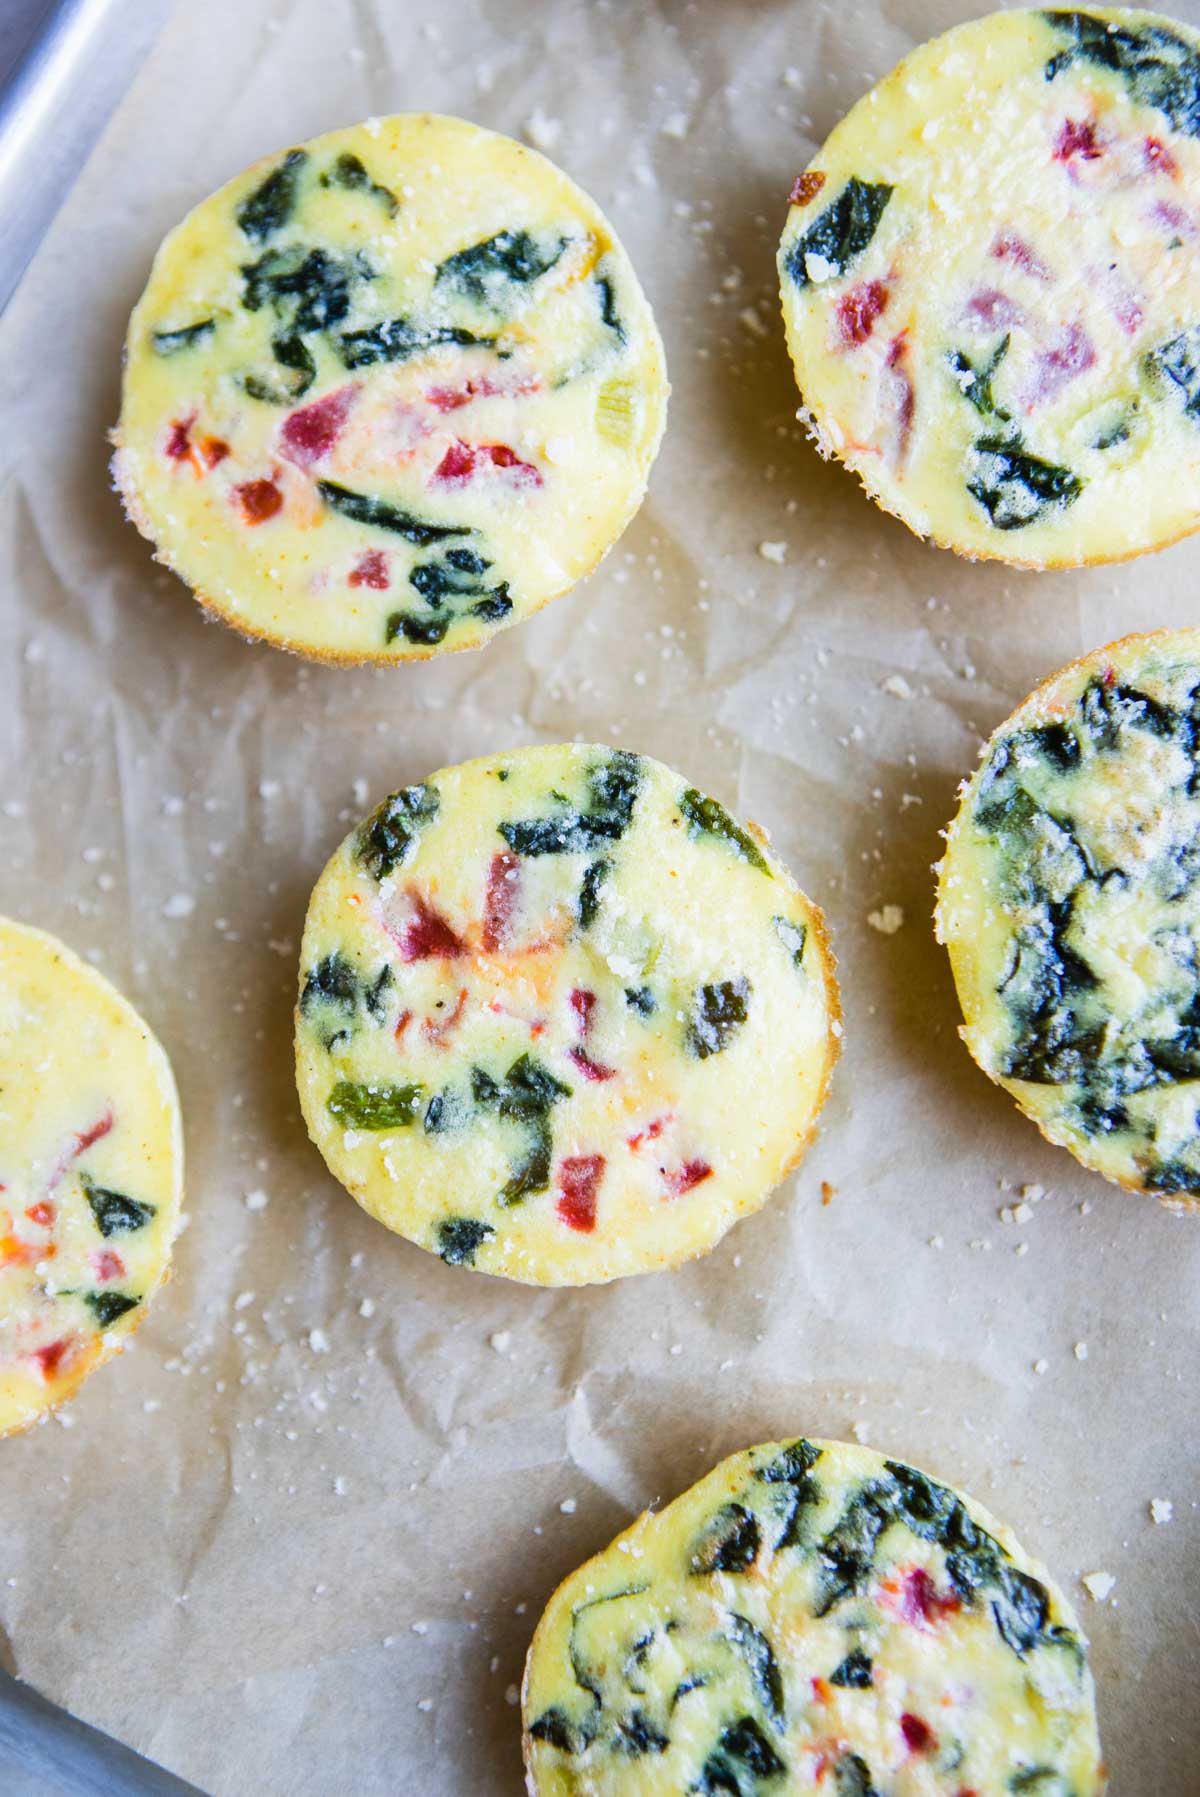 Egg White Bites Recipe with Spinach & Red Pepper - Howe We Live